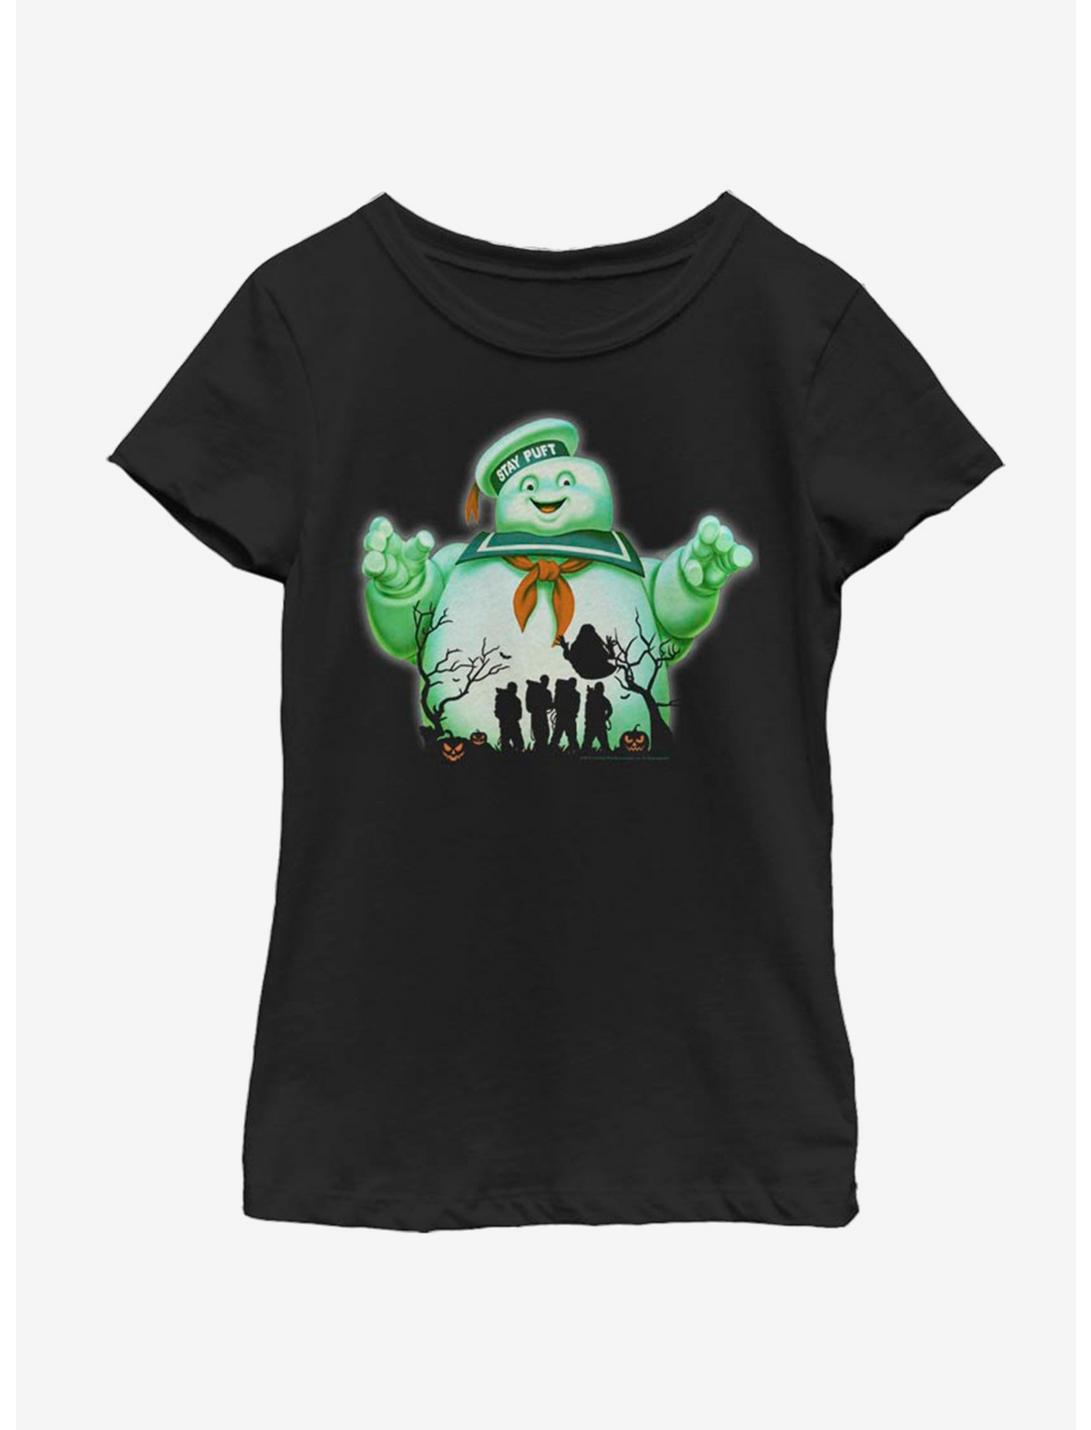 Ghostbusters Halloween Youth Girls T-Shirt, BLACK, hi-res